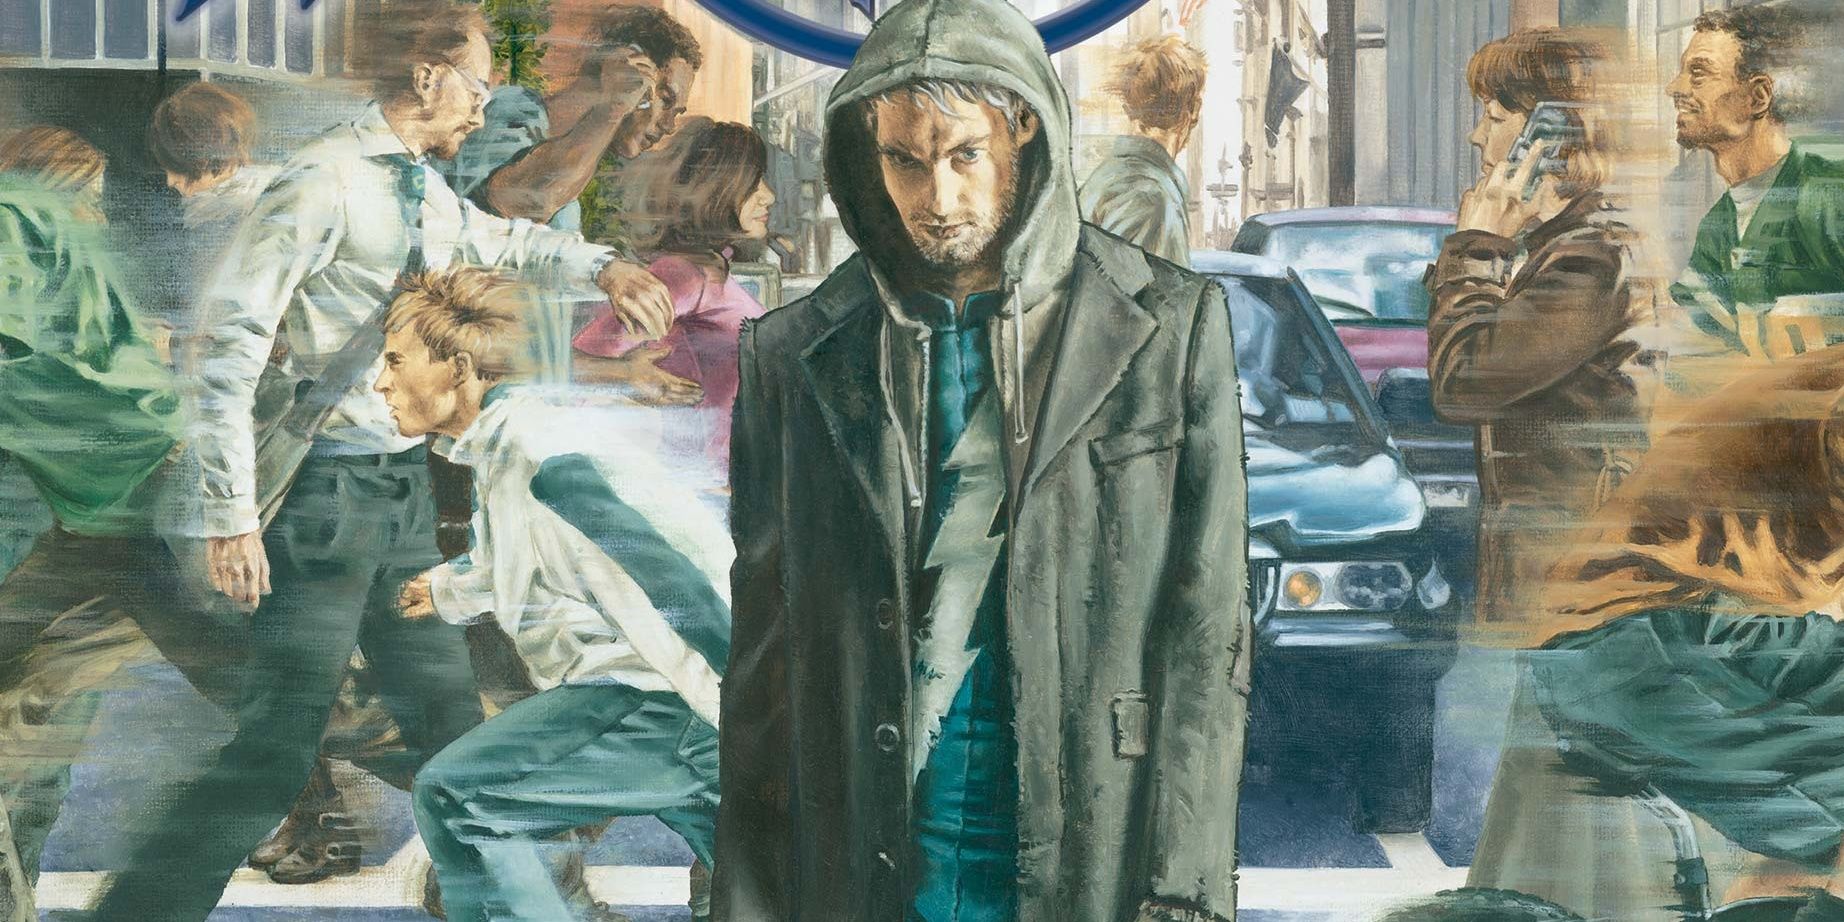 Son Of M cover featuring Quicksilver standing still wearing a hooded coat while citizens rush around him in a busy city.